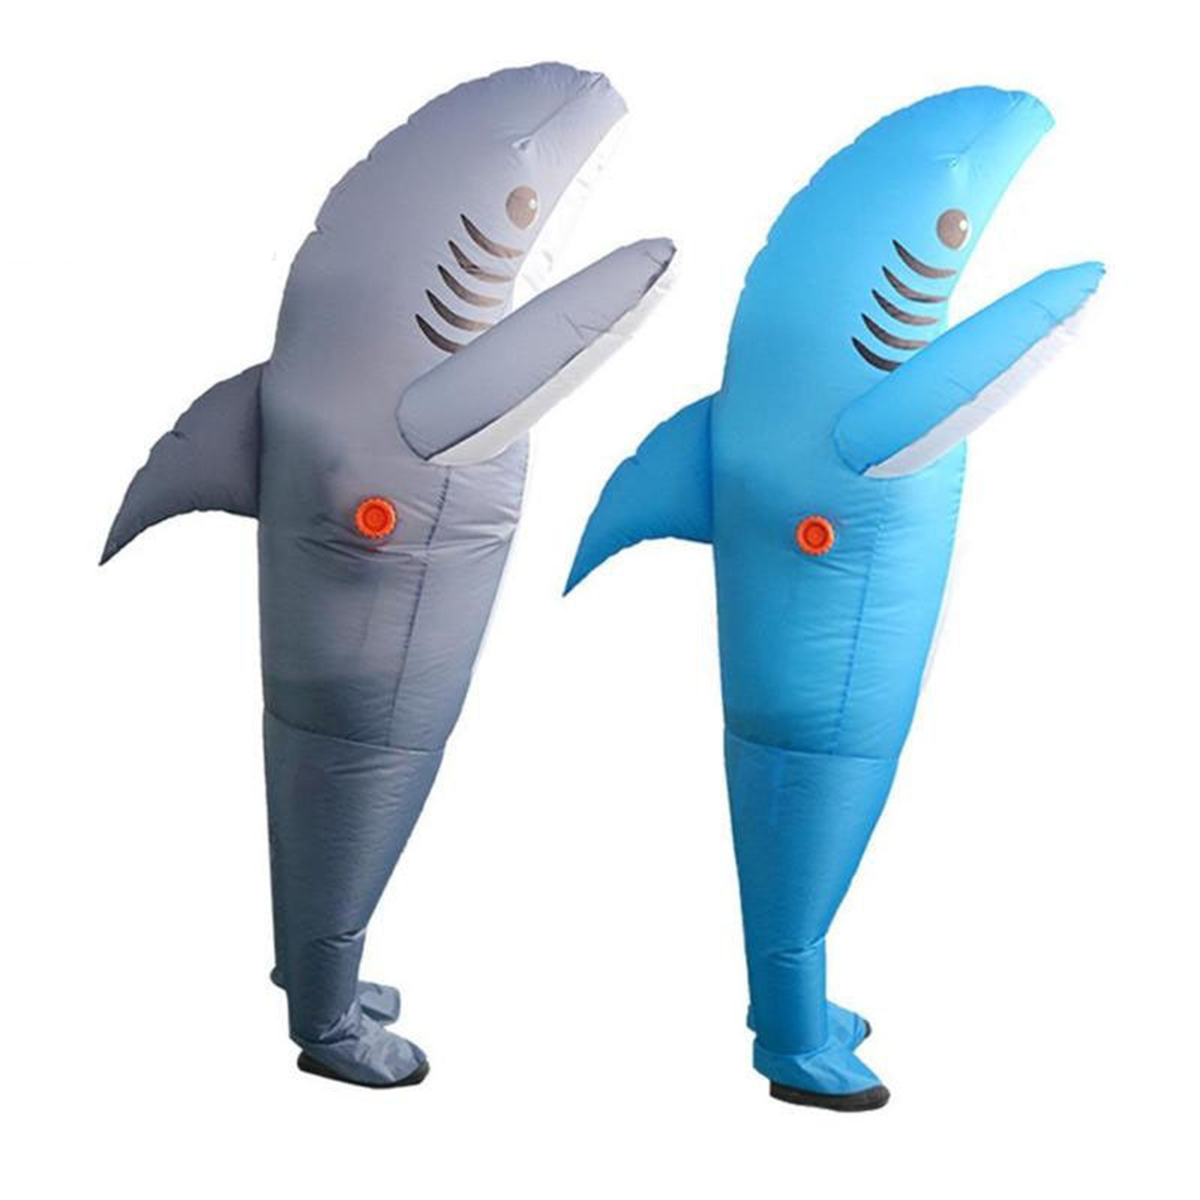 Inflatable Costumes Shark Adult Halloween Fancy Dress Funny Scary Dress Costume 9